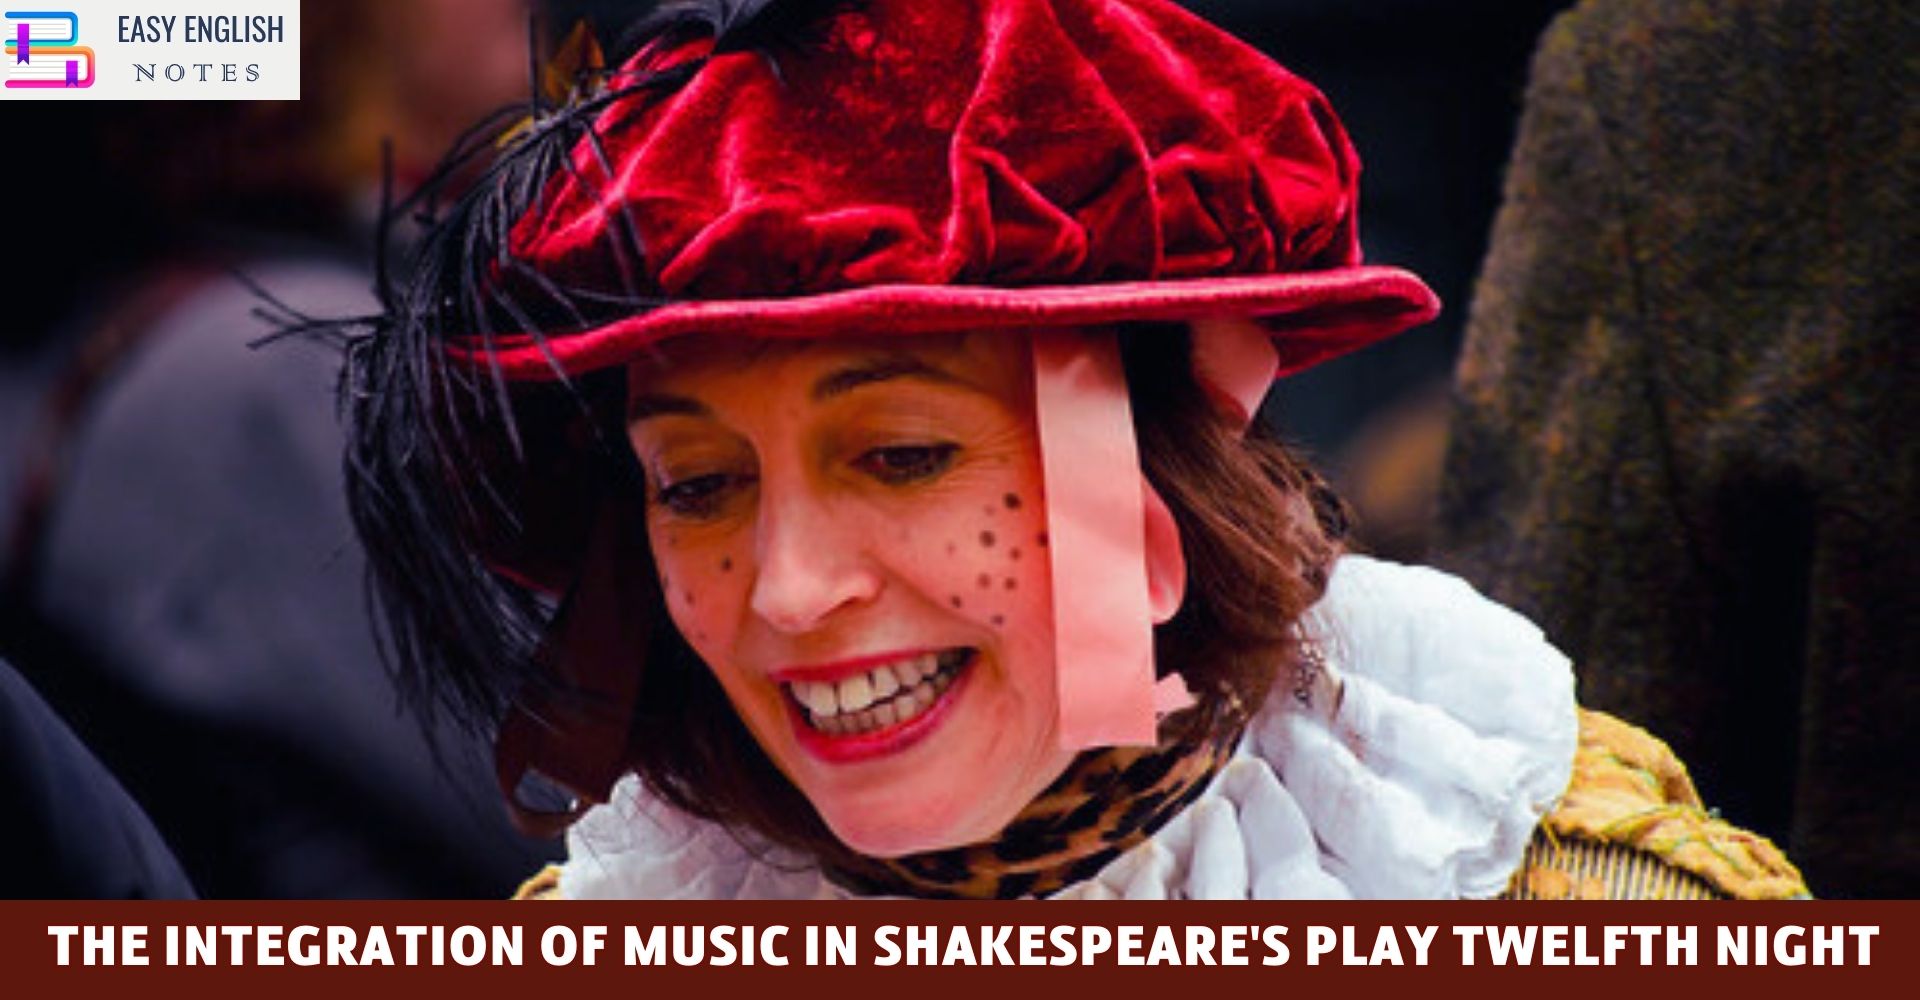 The Integration of Music in Shakespeare's Play Twelfth Night